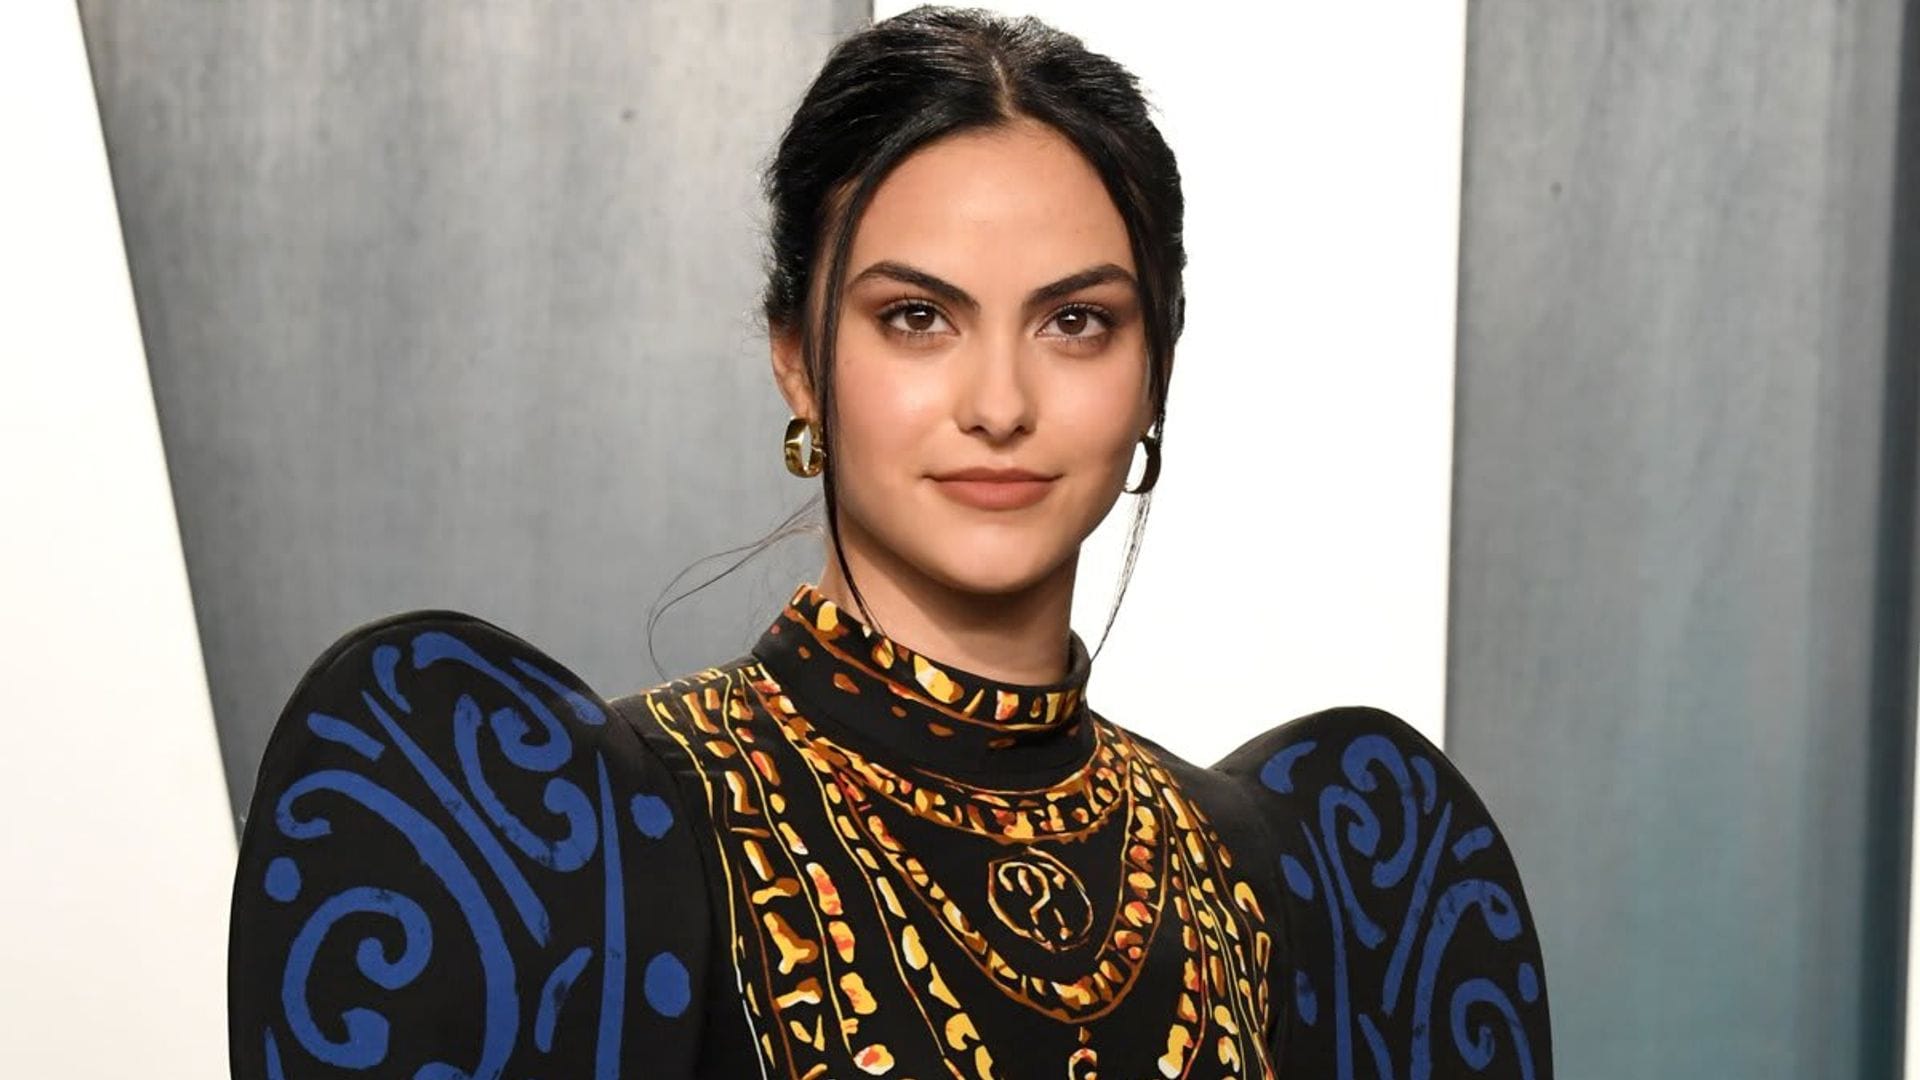 Riverdale’s Camila Mendes has signed on to play Pete Davidson’s love interest in an upcoming movie